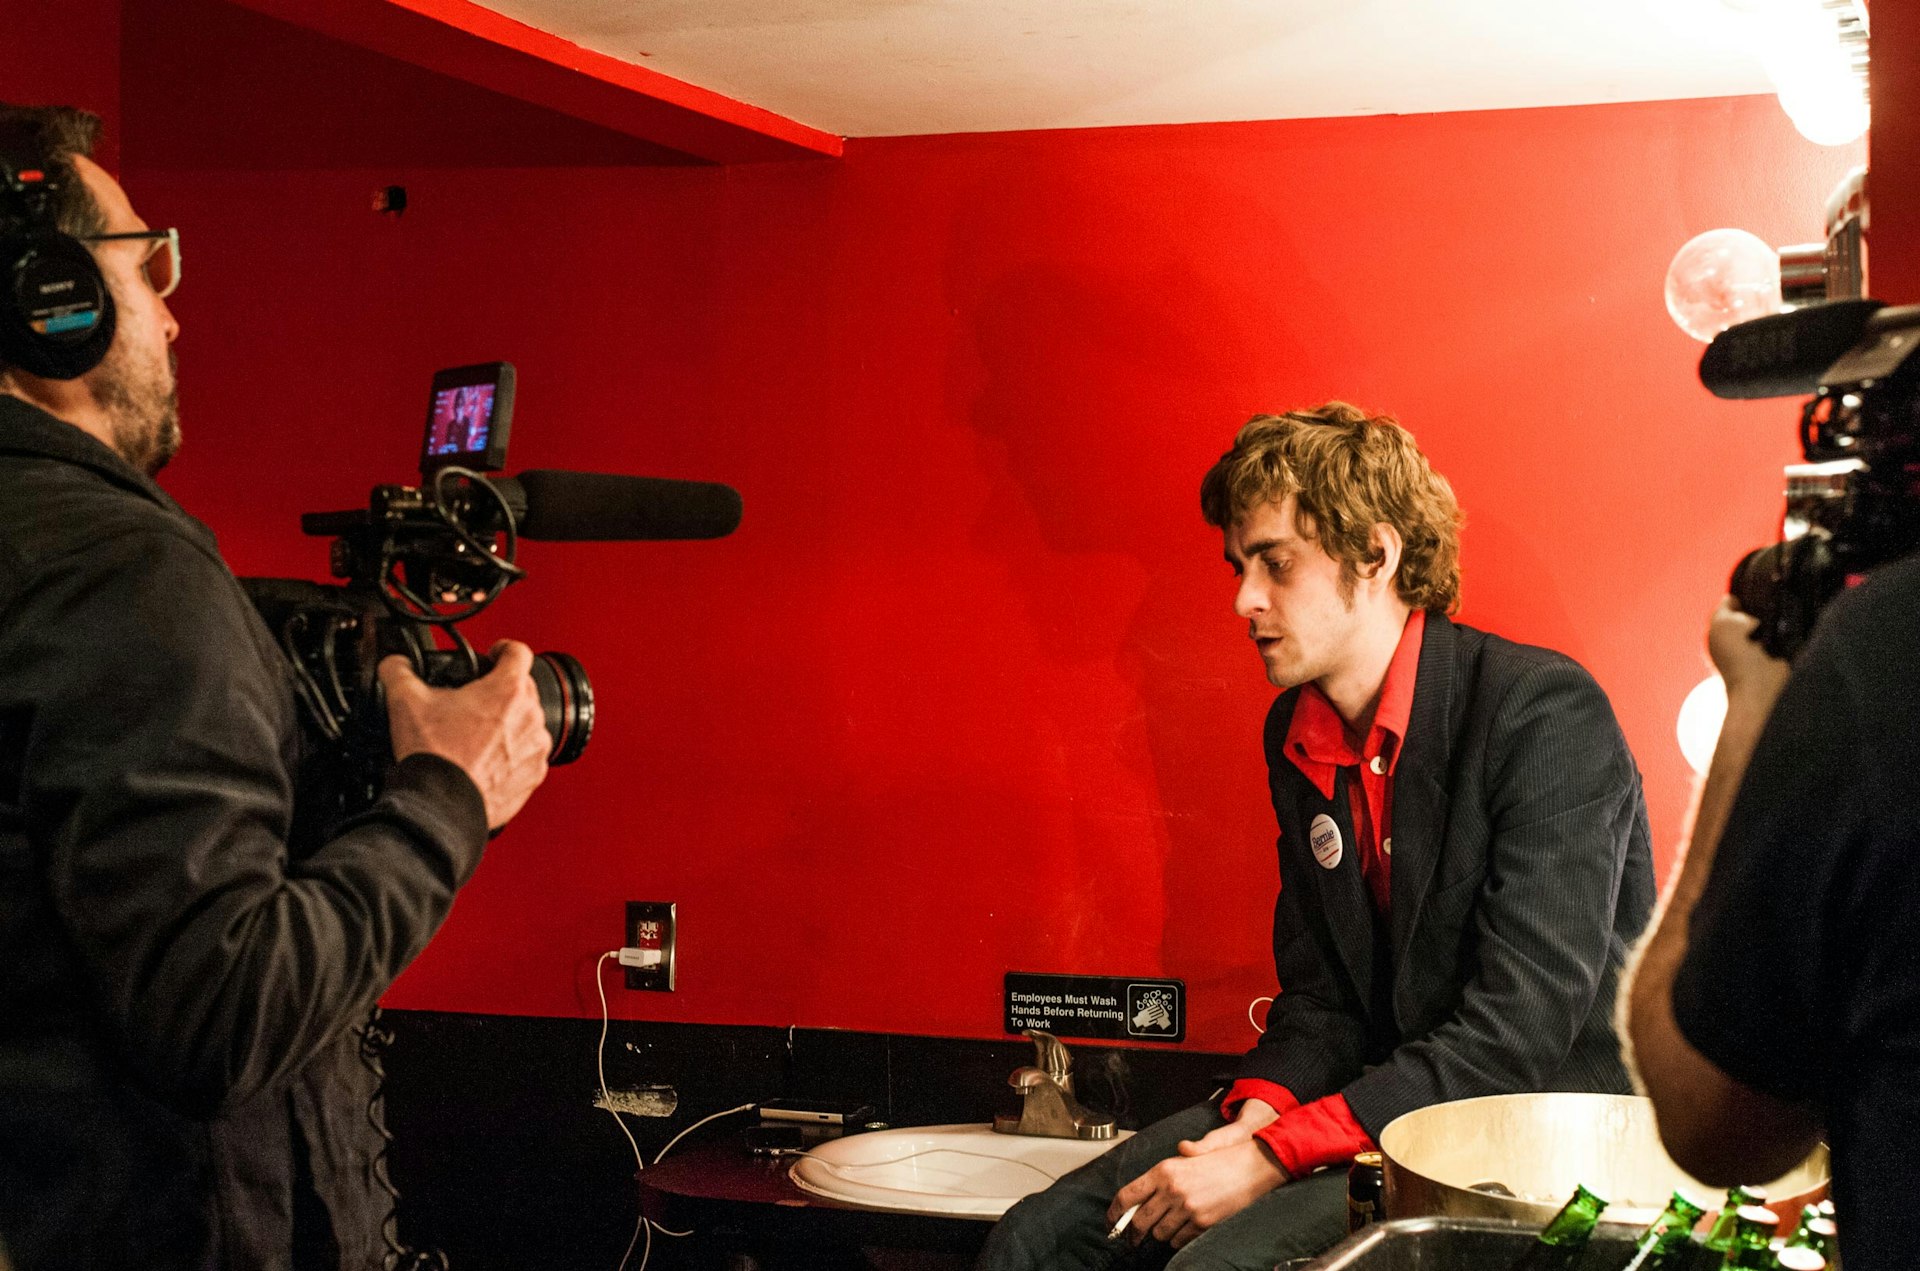 Saul being interviewed at Le Poisson Rouge, New York.